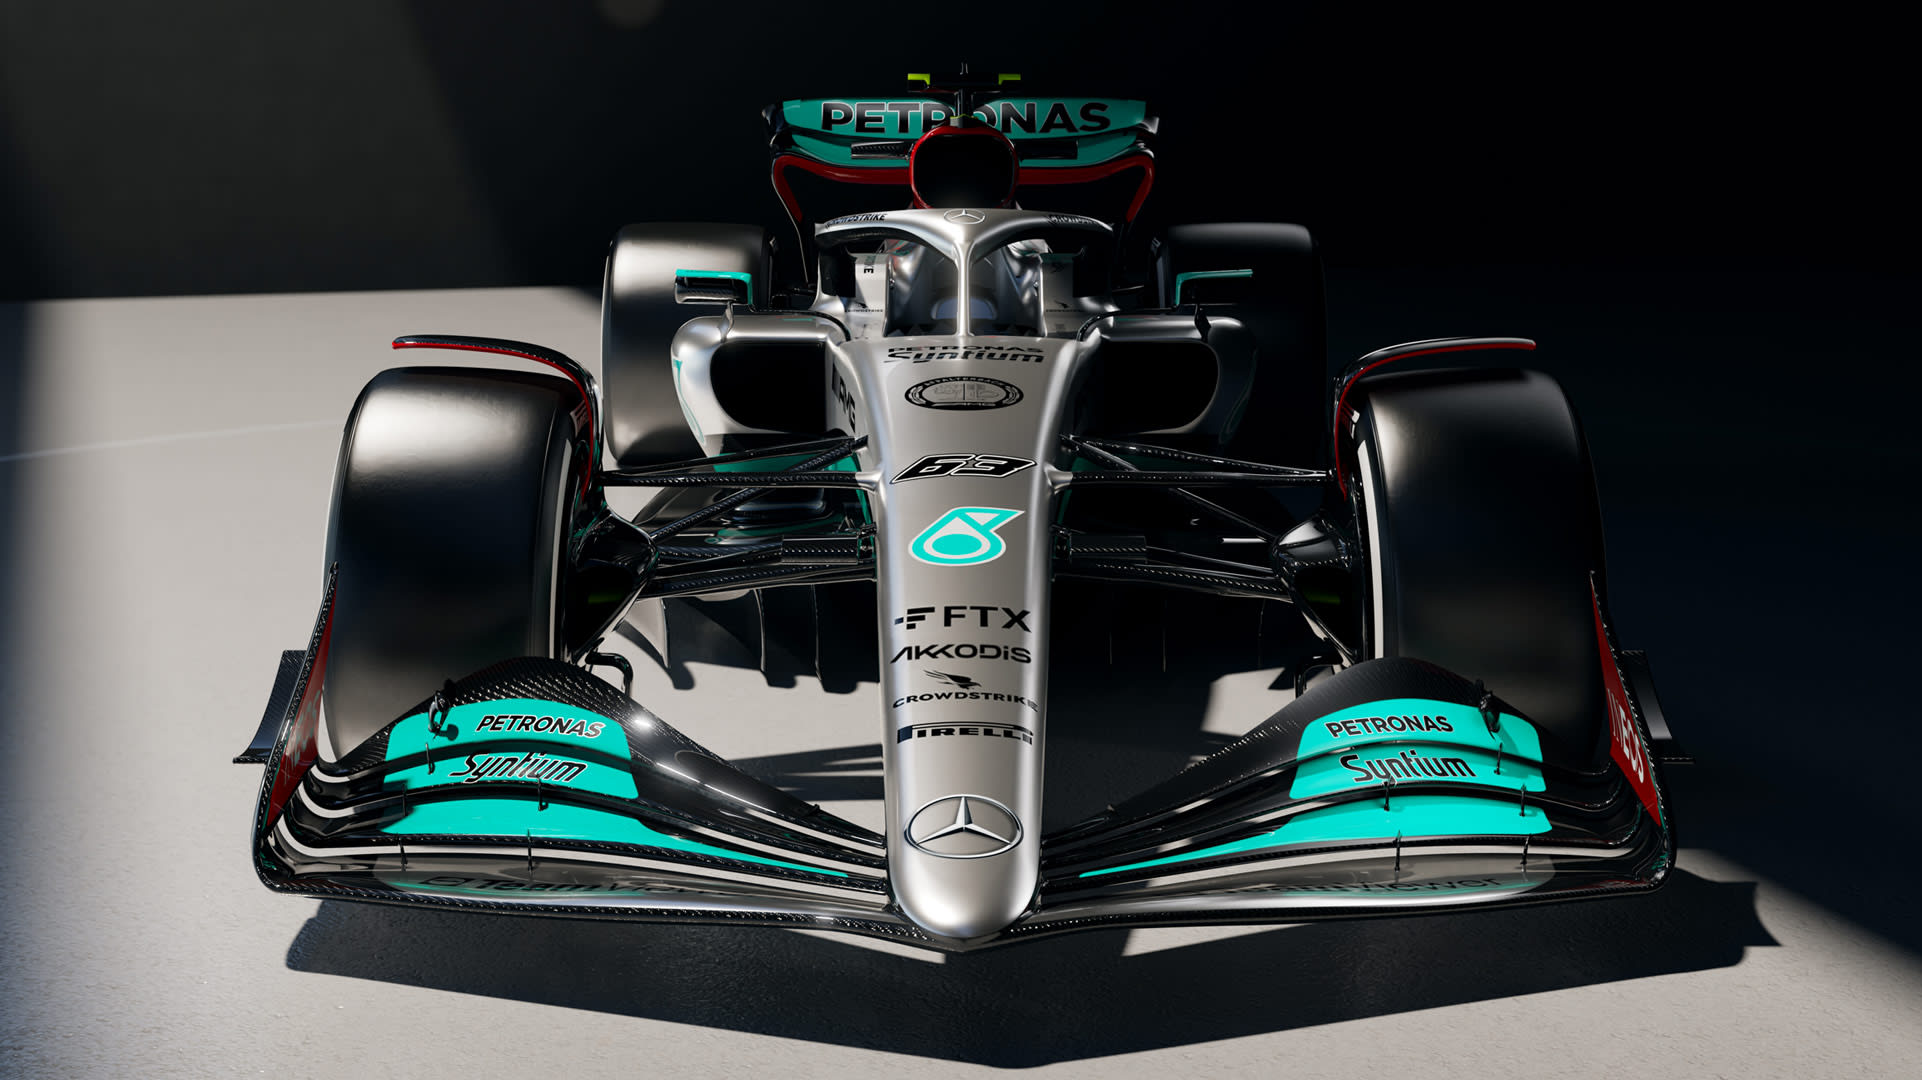 ANALYSIS: Delving into the details on the new-for-2022 Mercedes W13